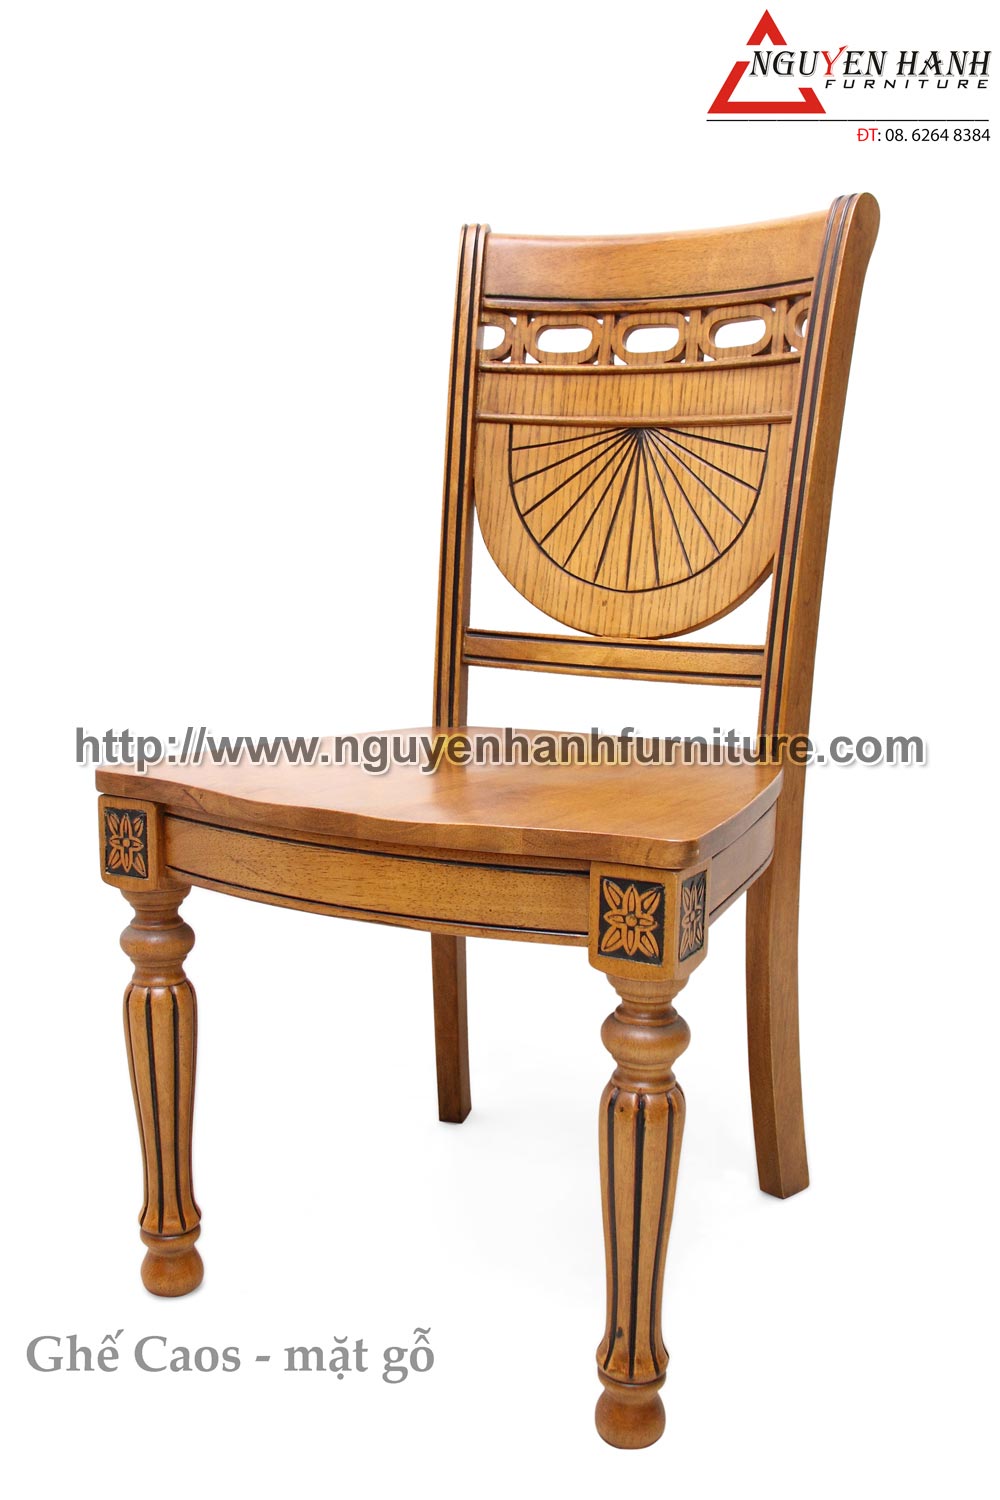 Name product: caos chair